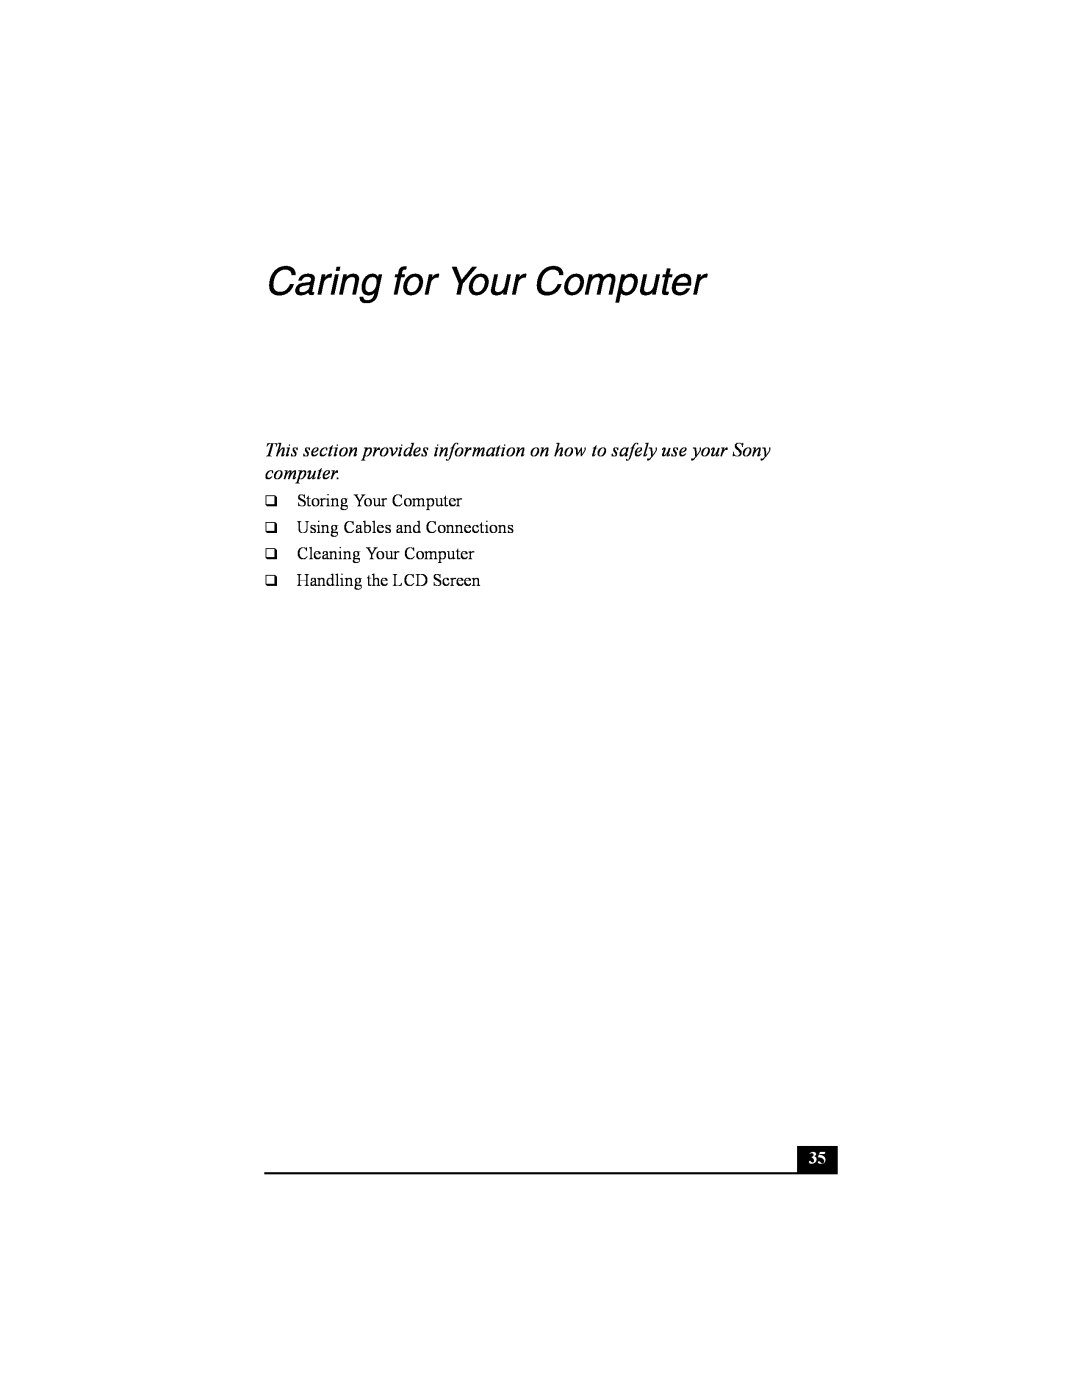 Sony PCG-FRV manual Caring for Your Computer, Storing Your Computer Using Cables and Connections 